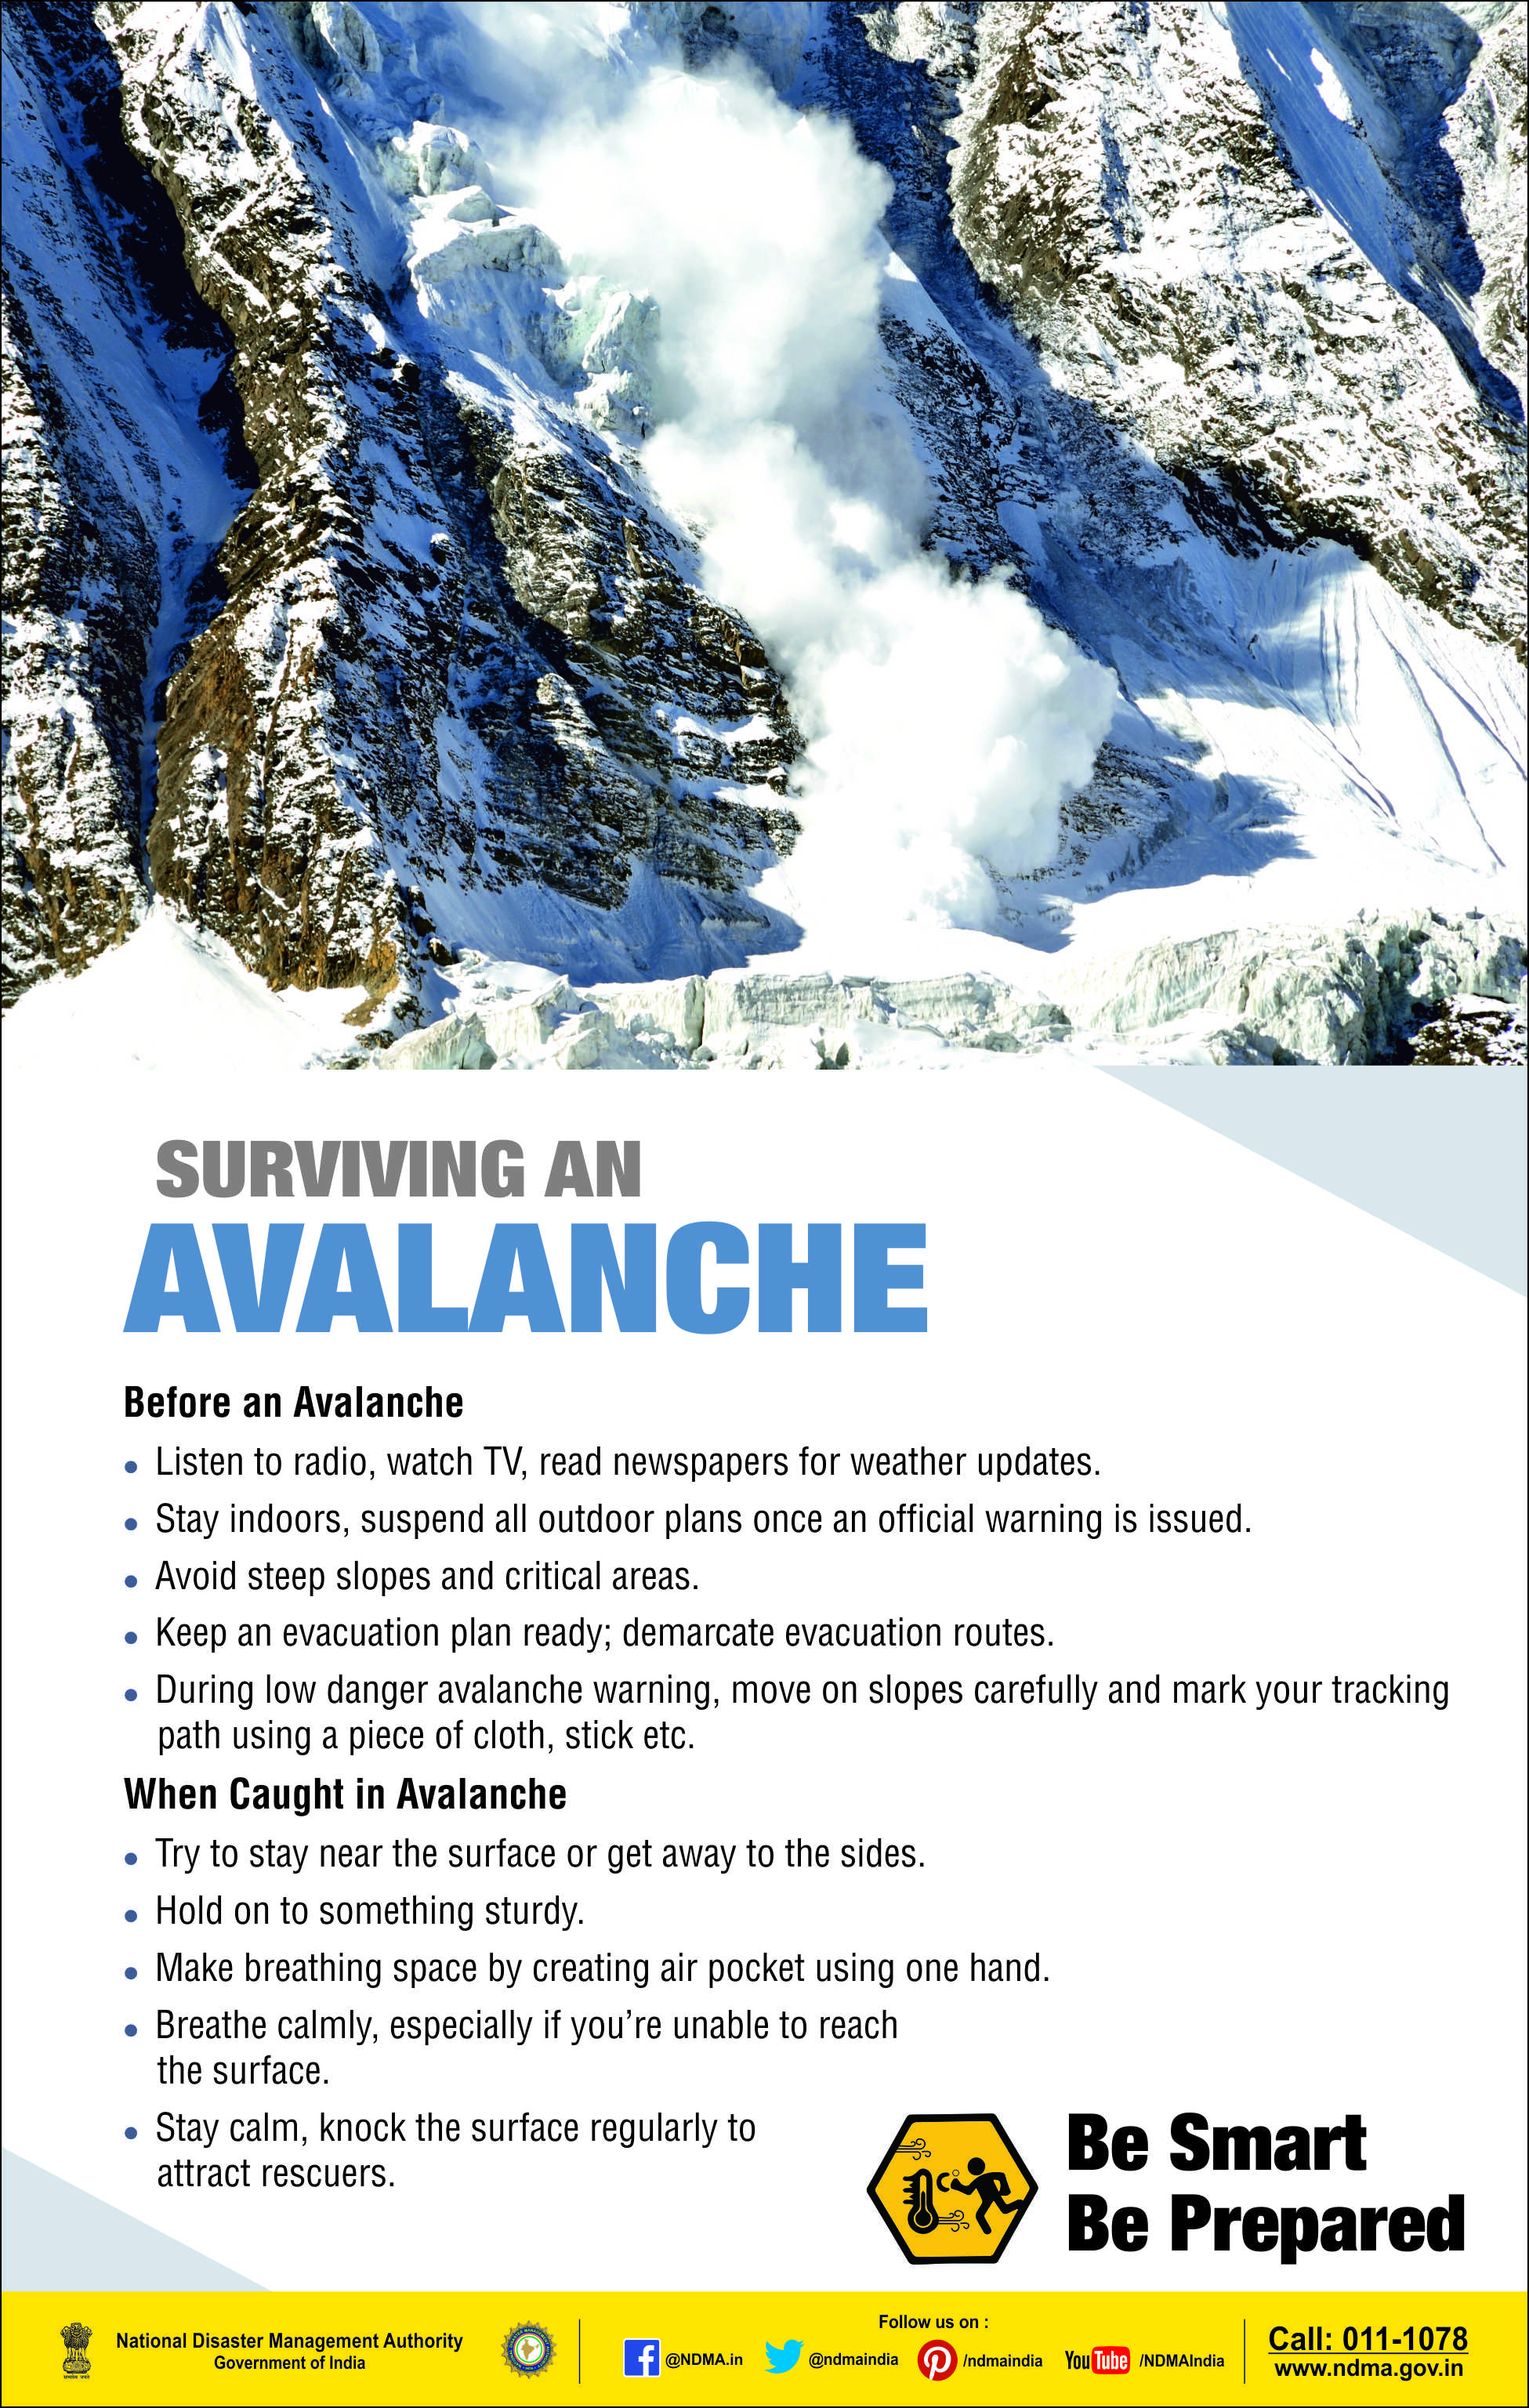 Do’s and don’ts of an avalanche.